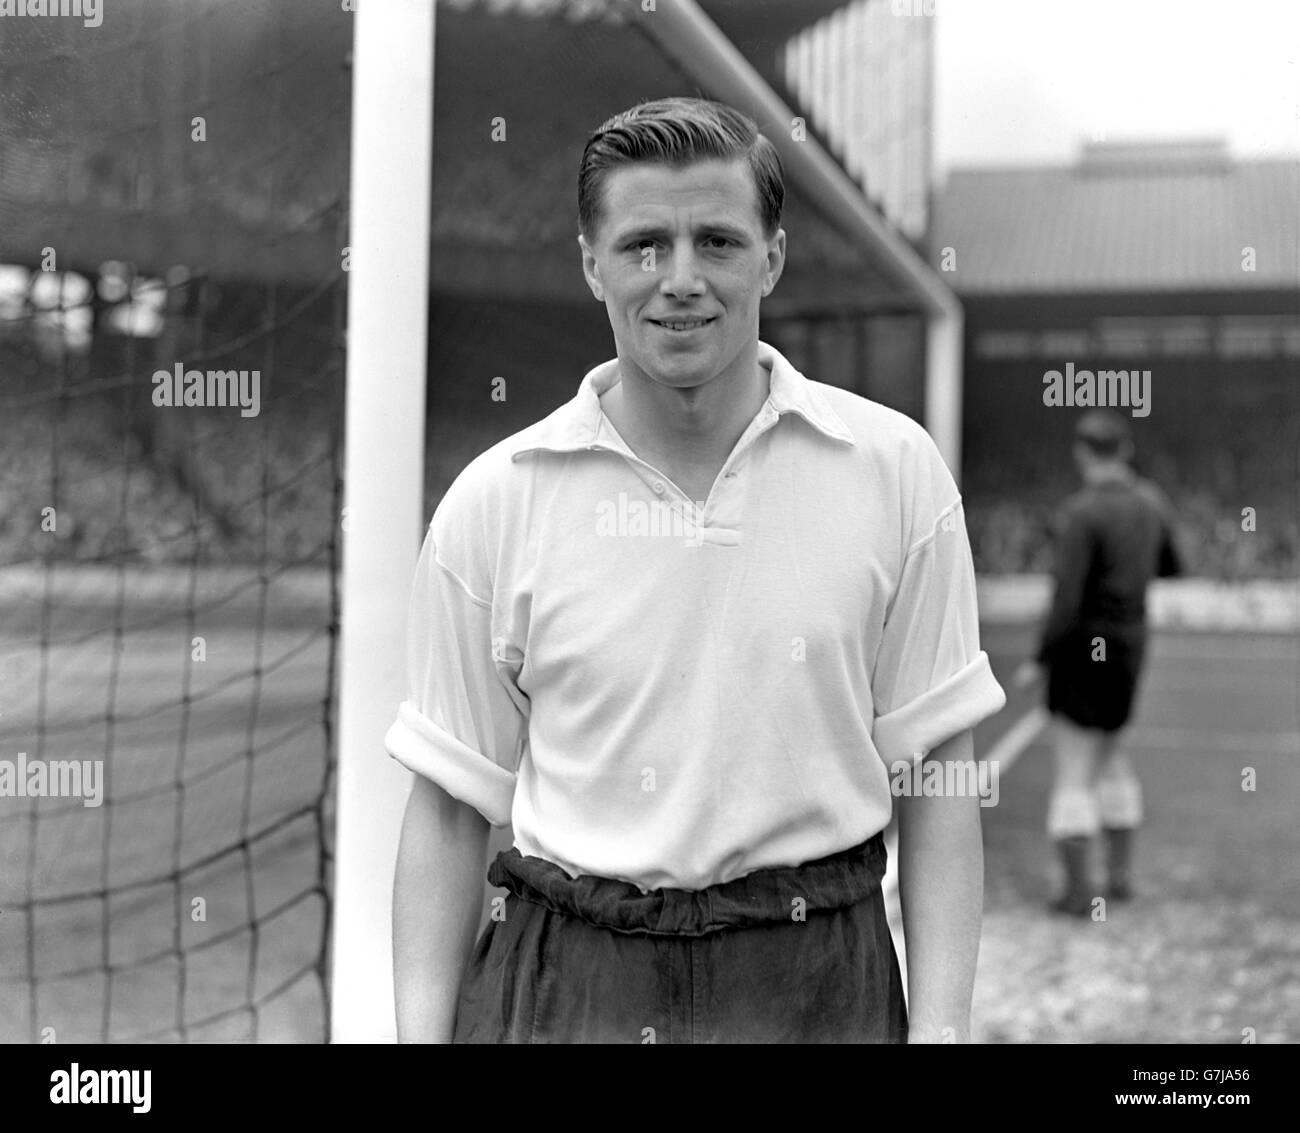 Soccer - Everton Photocall - 1954. Eric Moore, Everton. Banque D'Images